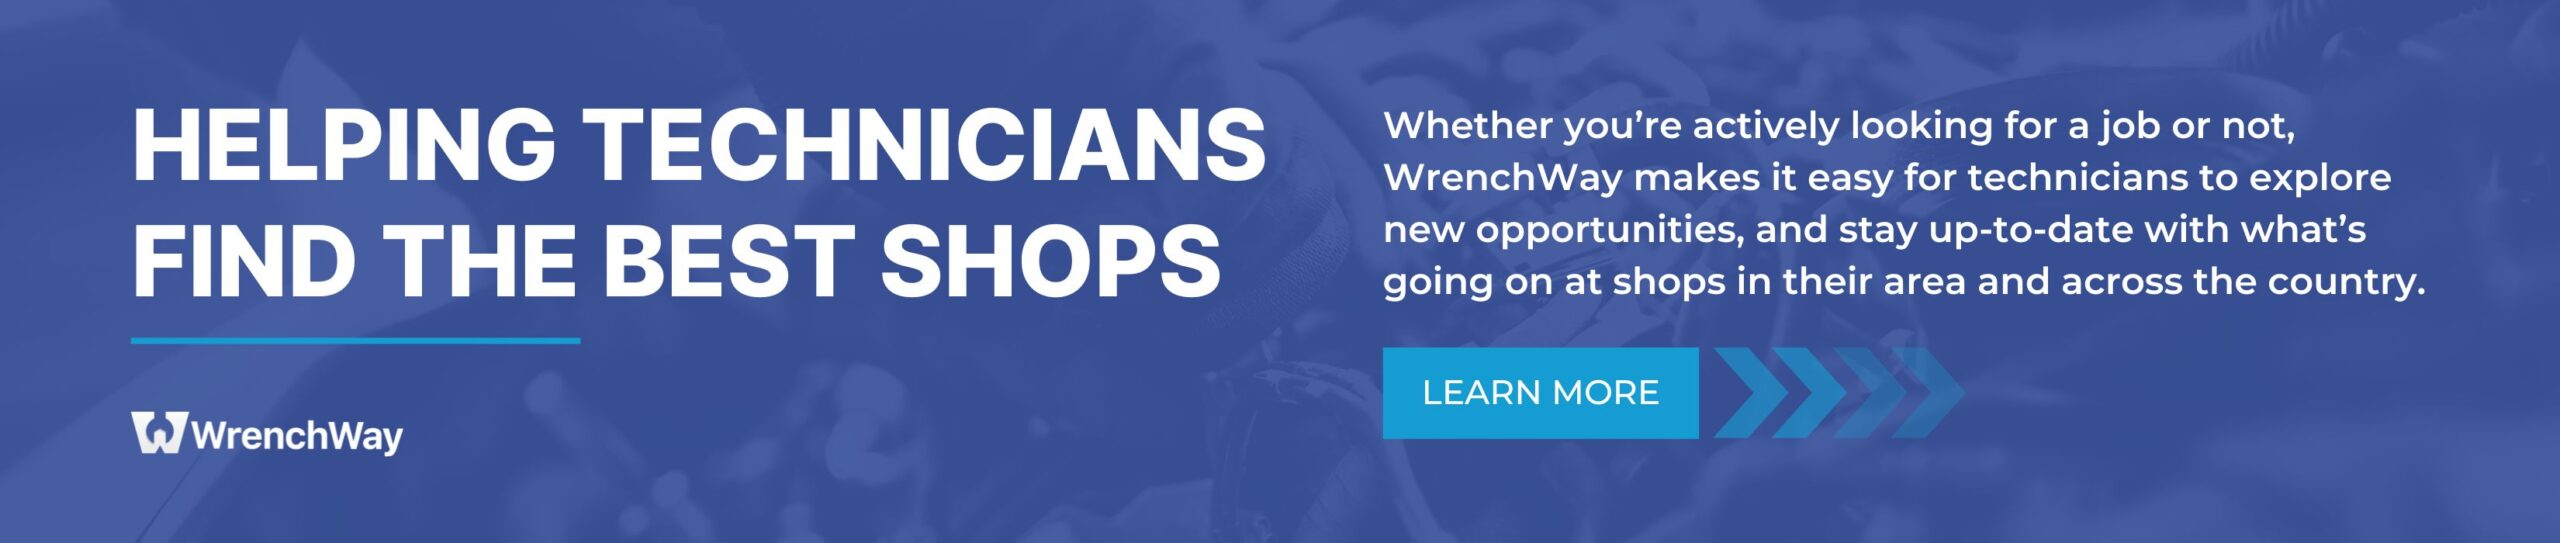 WrenchWay helps technicians find the best shops